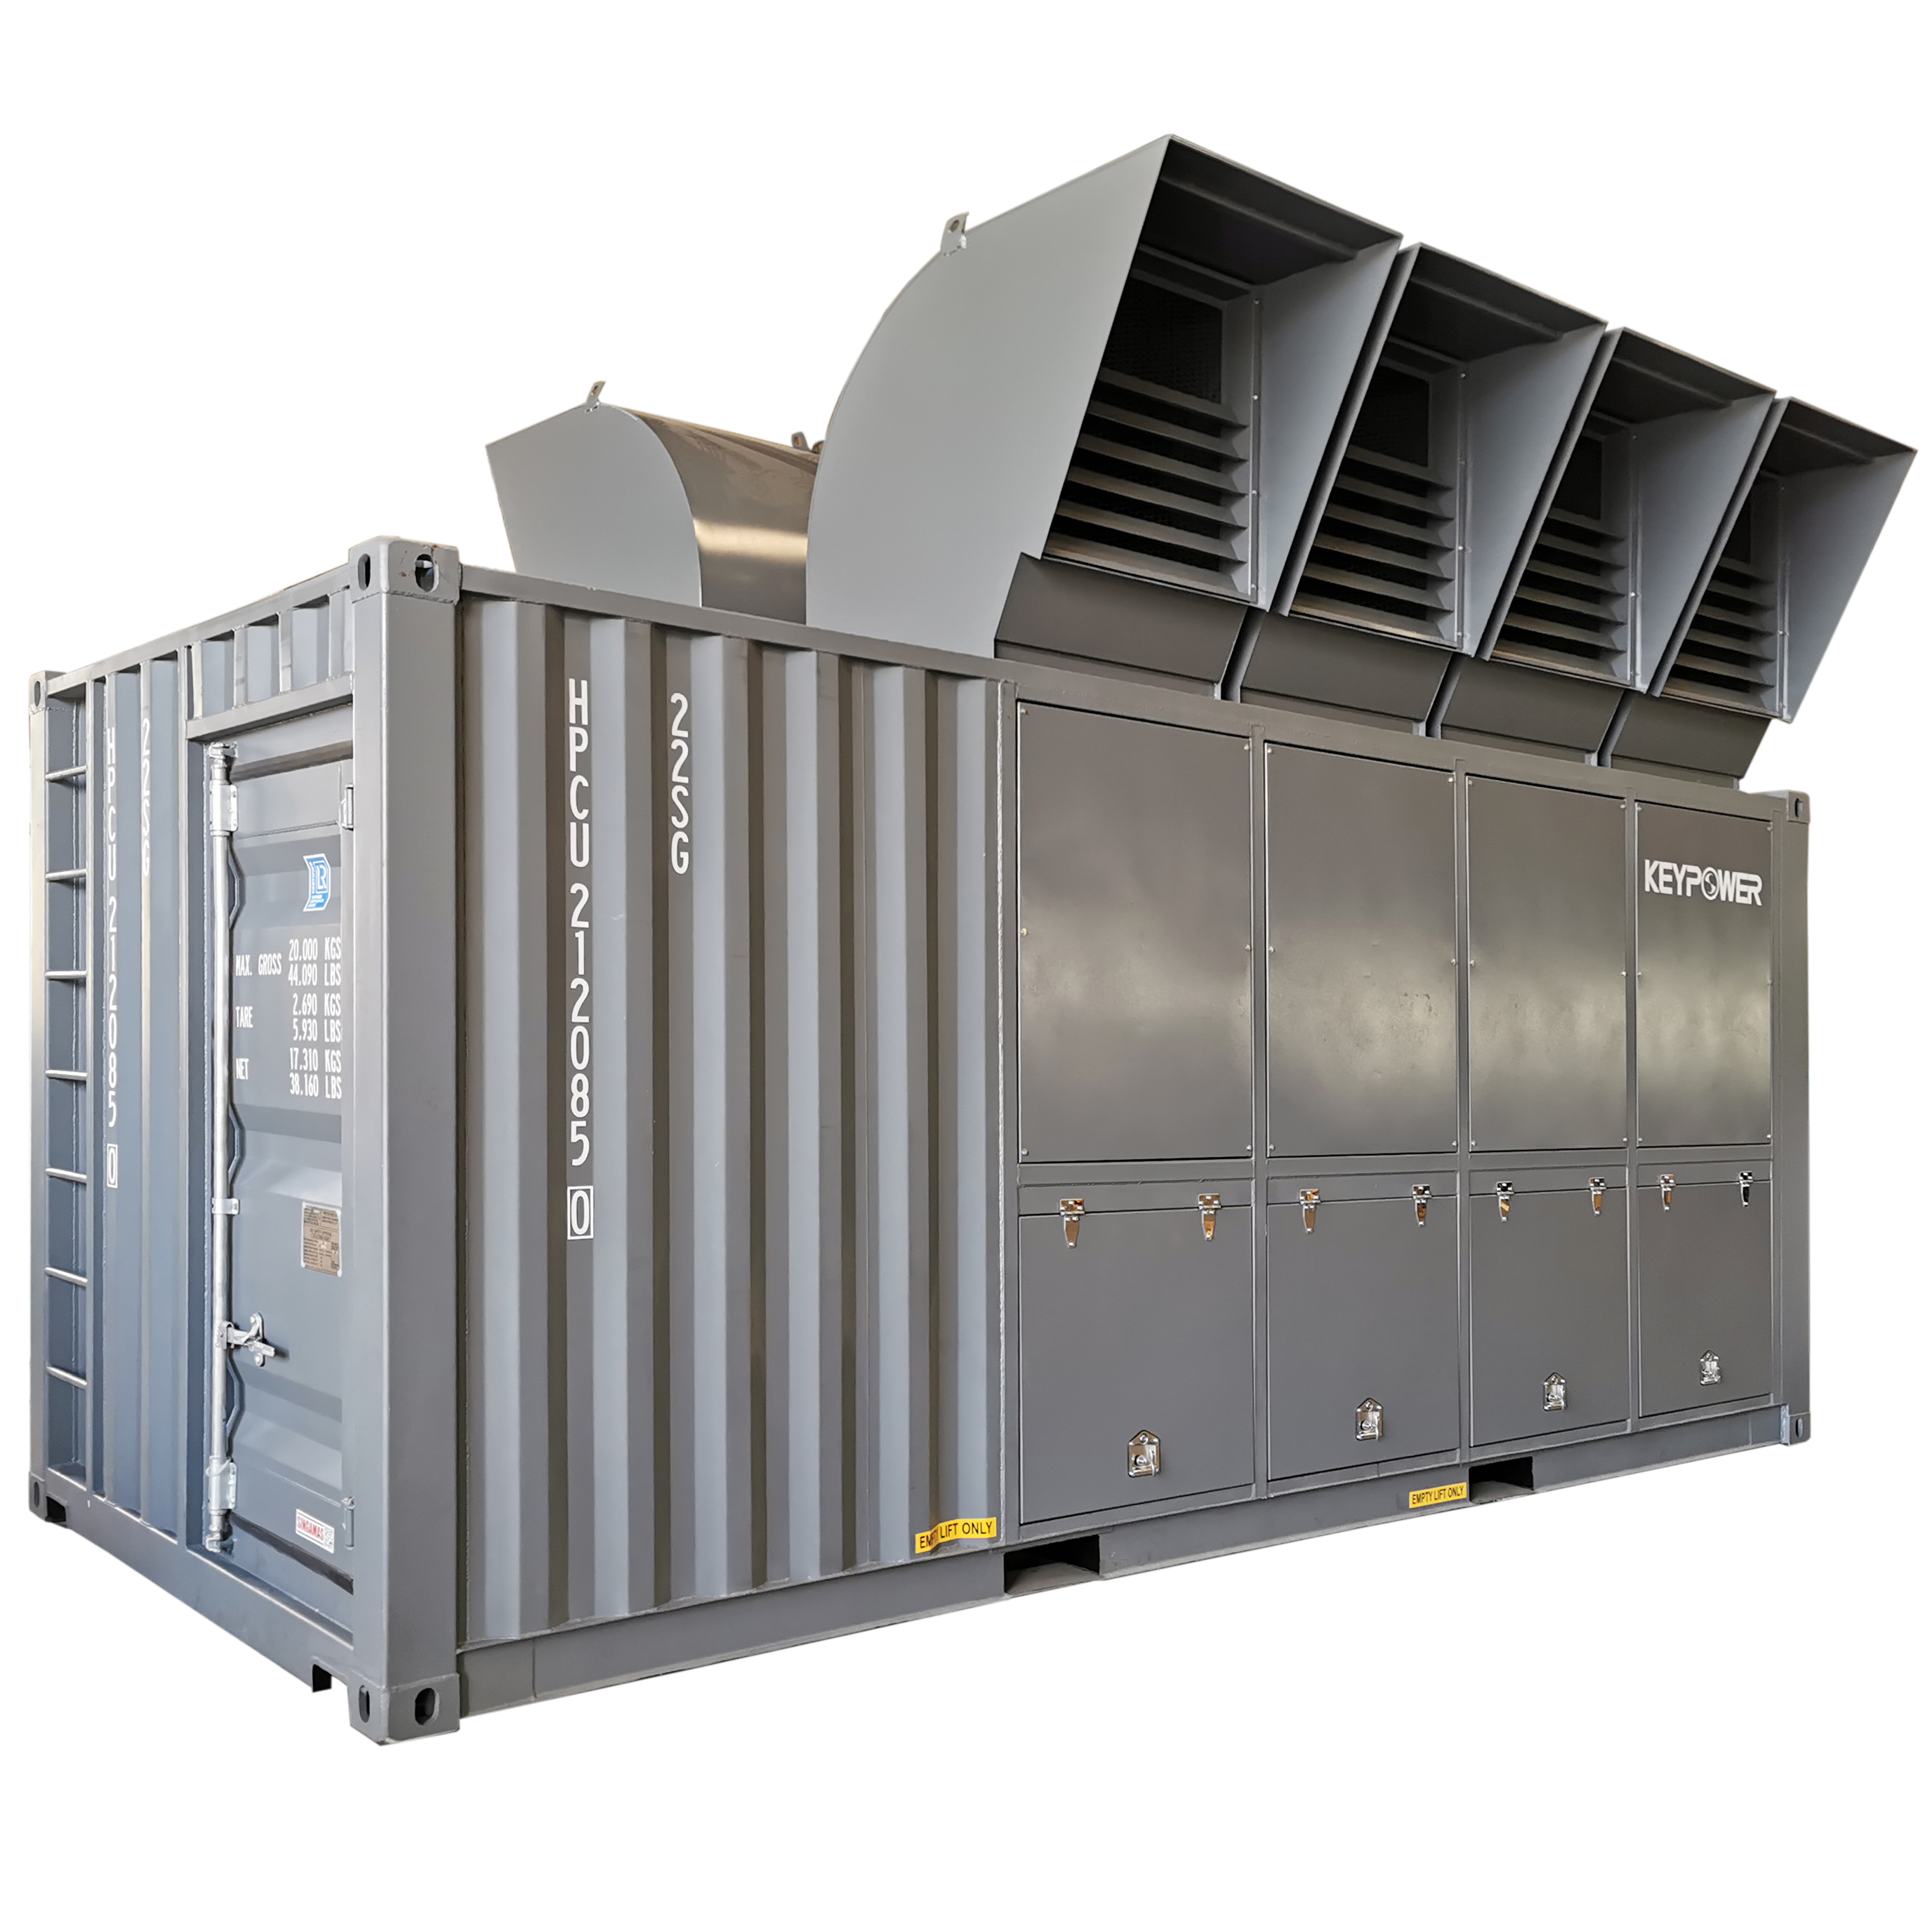 Low price for Ireland Resistive Load Banks - KEYPOWER 2400kW Resistive Load Bank For Generator Testing – Gff Keypower